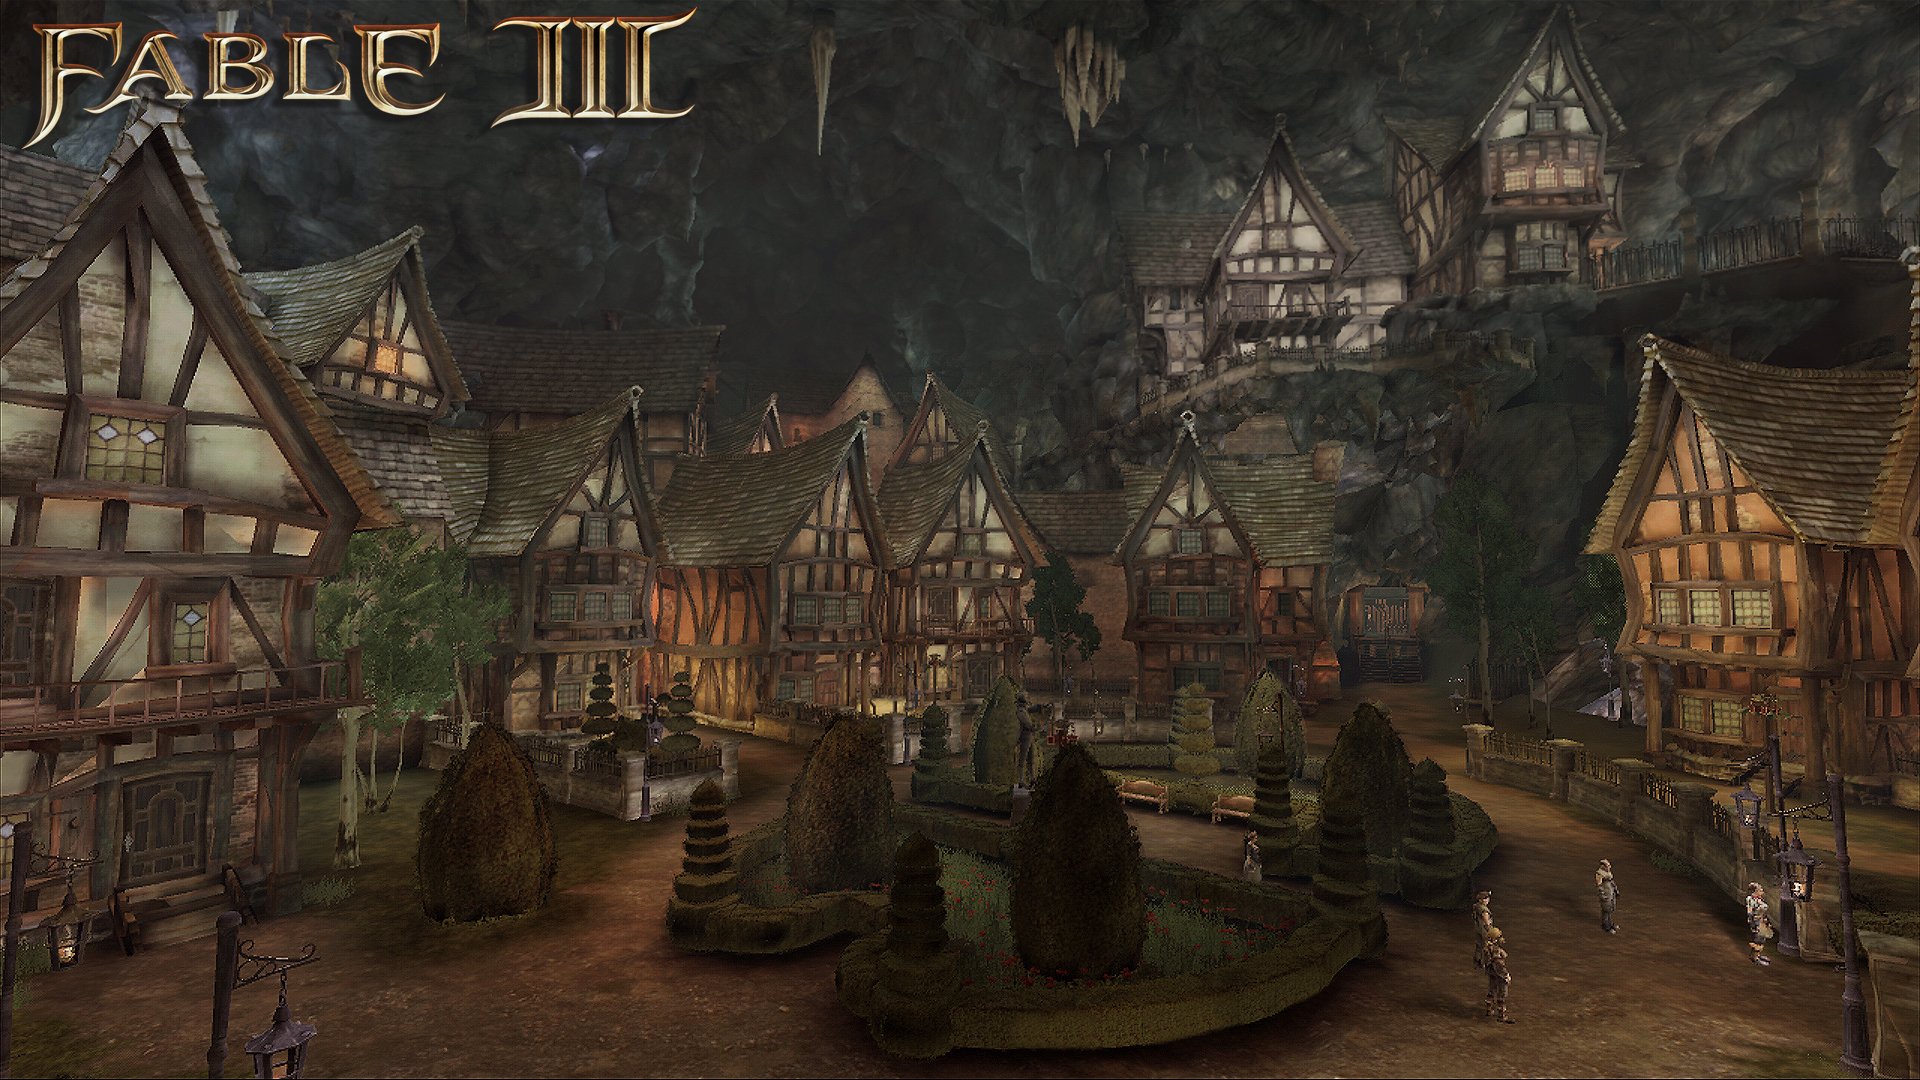 Image of Fable 3 long hairstyle location - The Spire